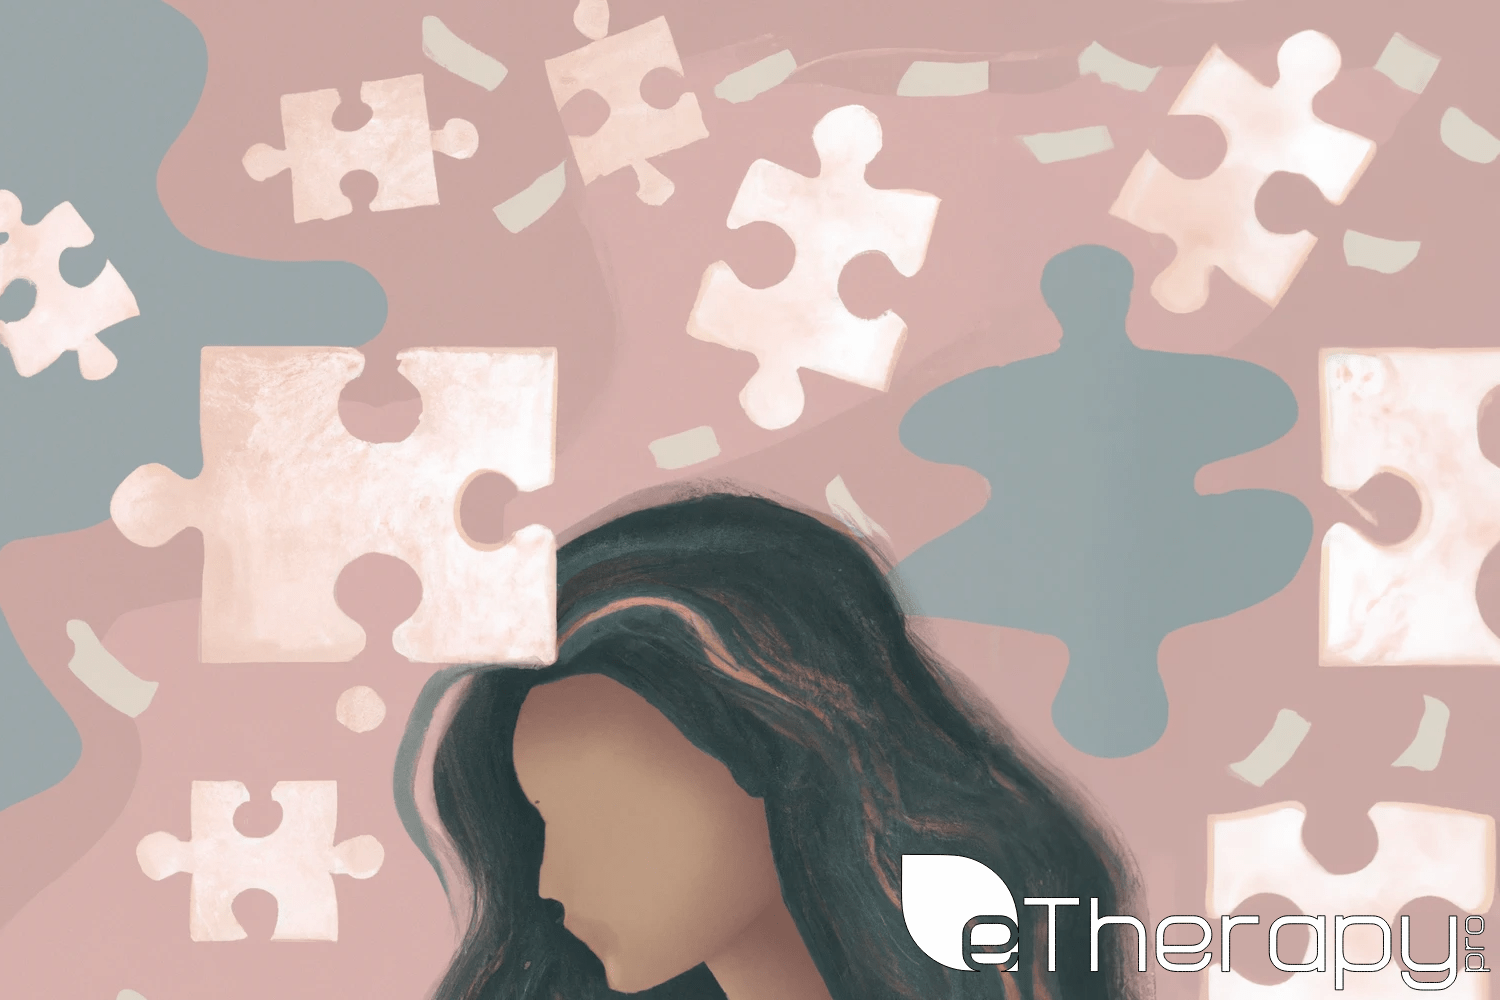 A serene image of a person surrounded by puzzle pieces